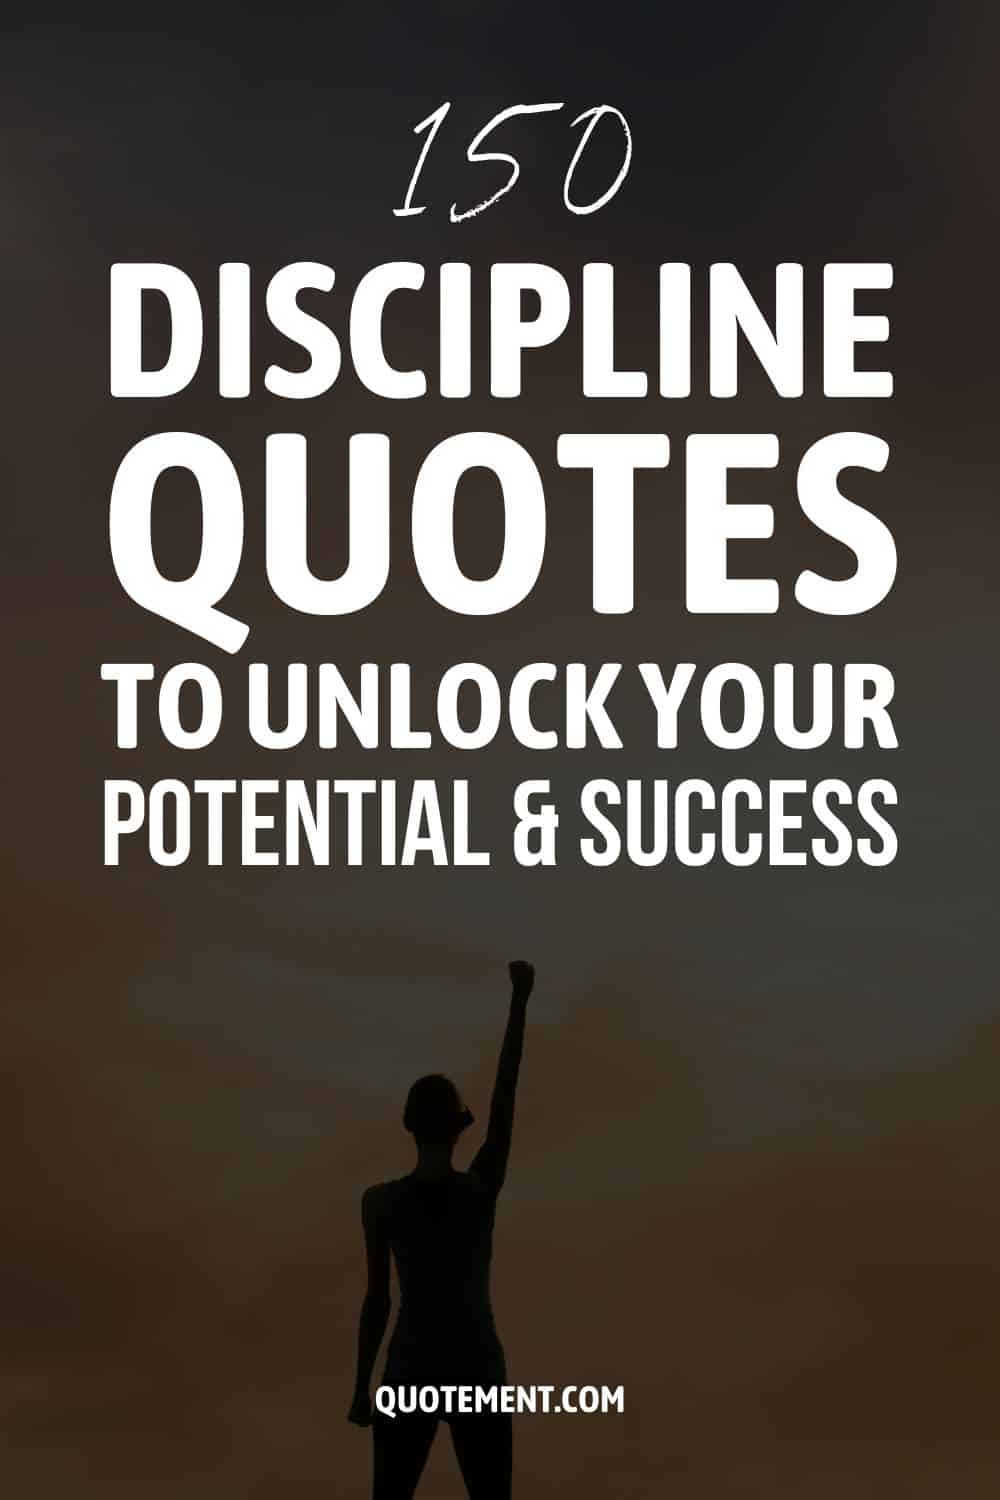 150 Discipline Quotes To Unlock Your Potential And Success 